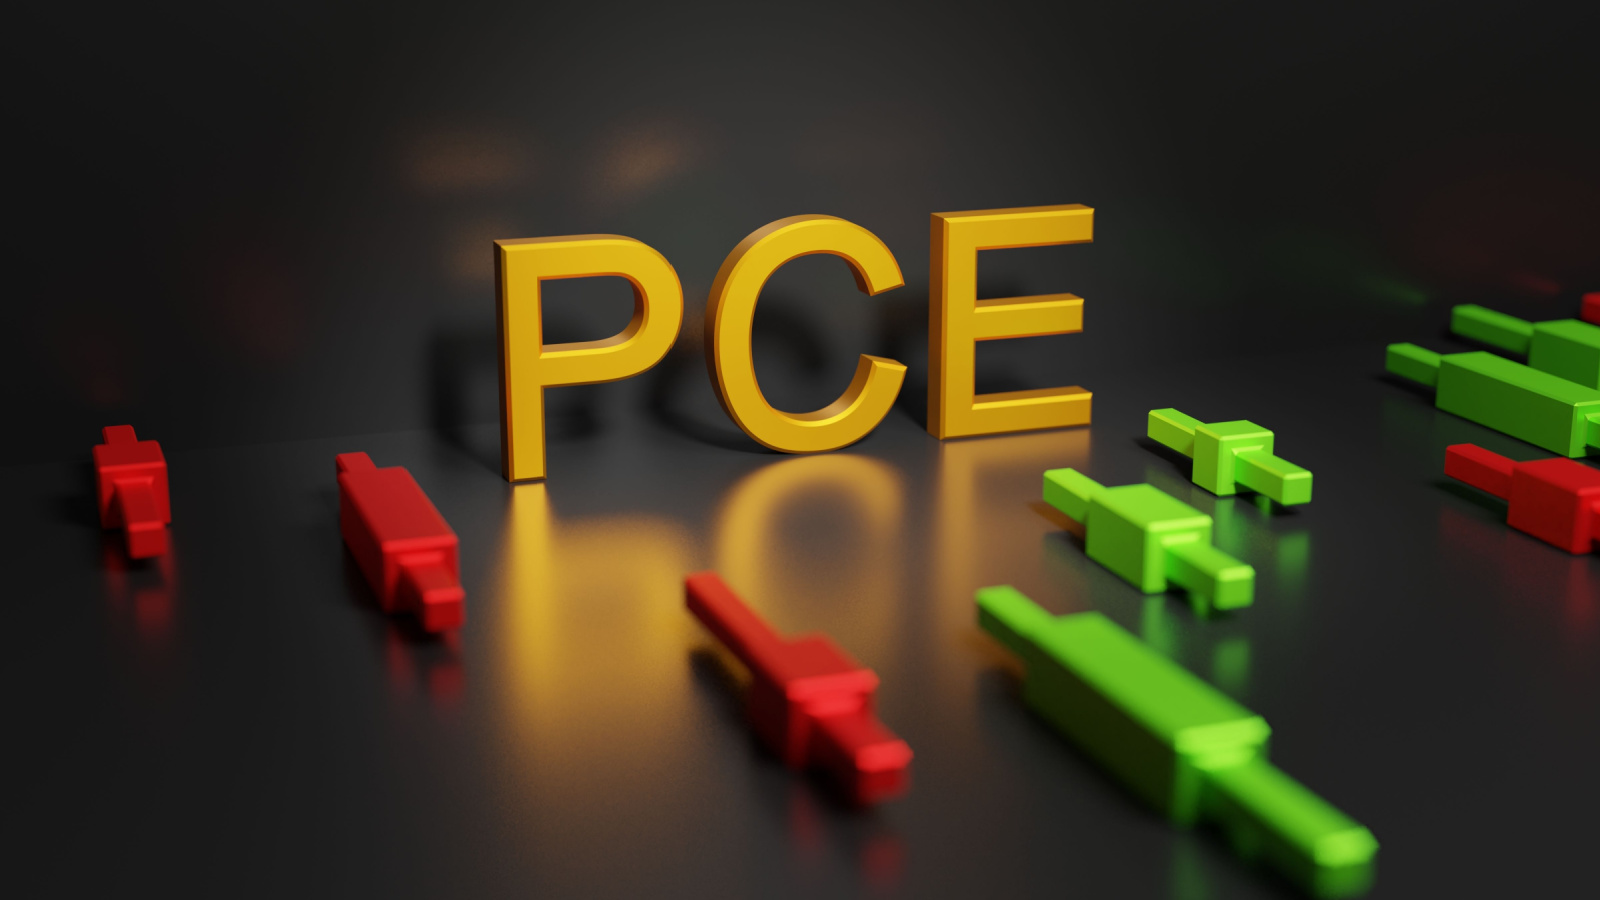 January's PCE price index warning Why stocks fell today Review Guruu